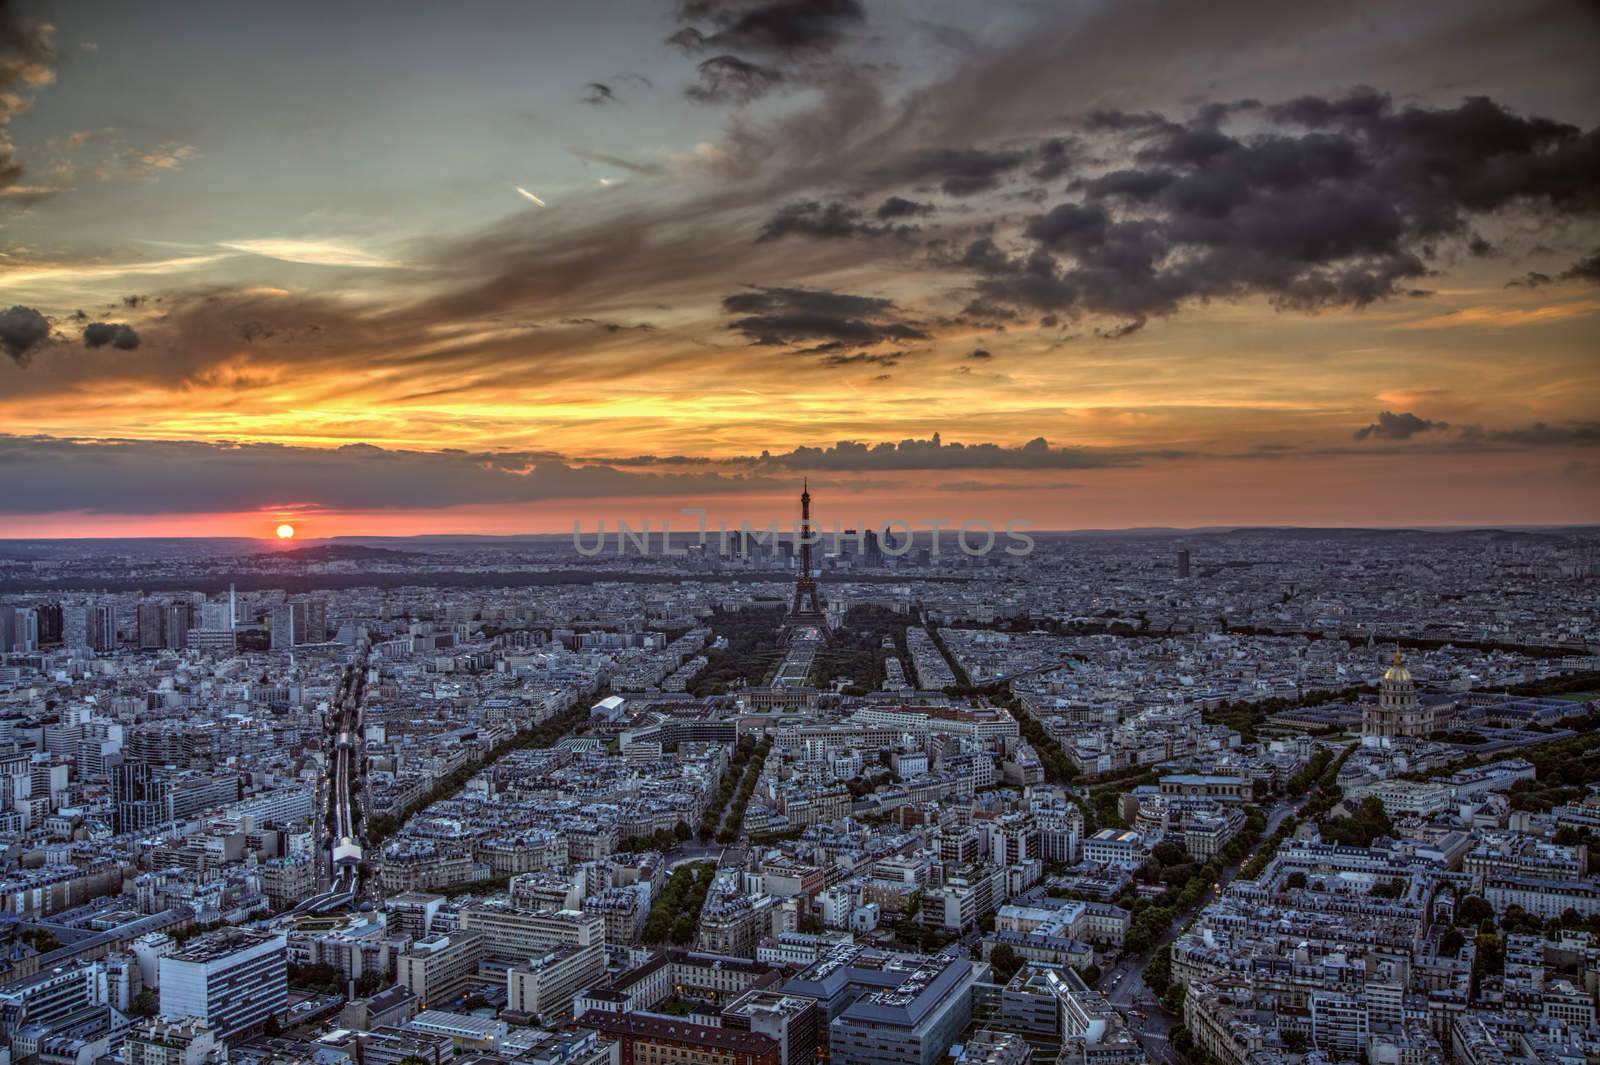 Sunset over Paris by Harvepino